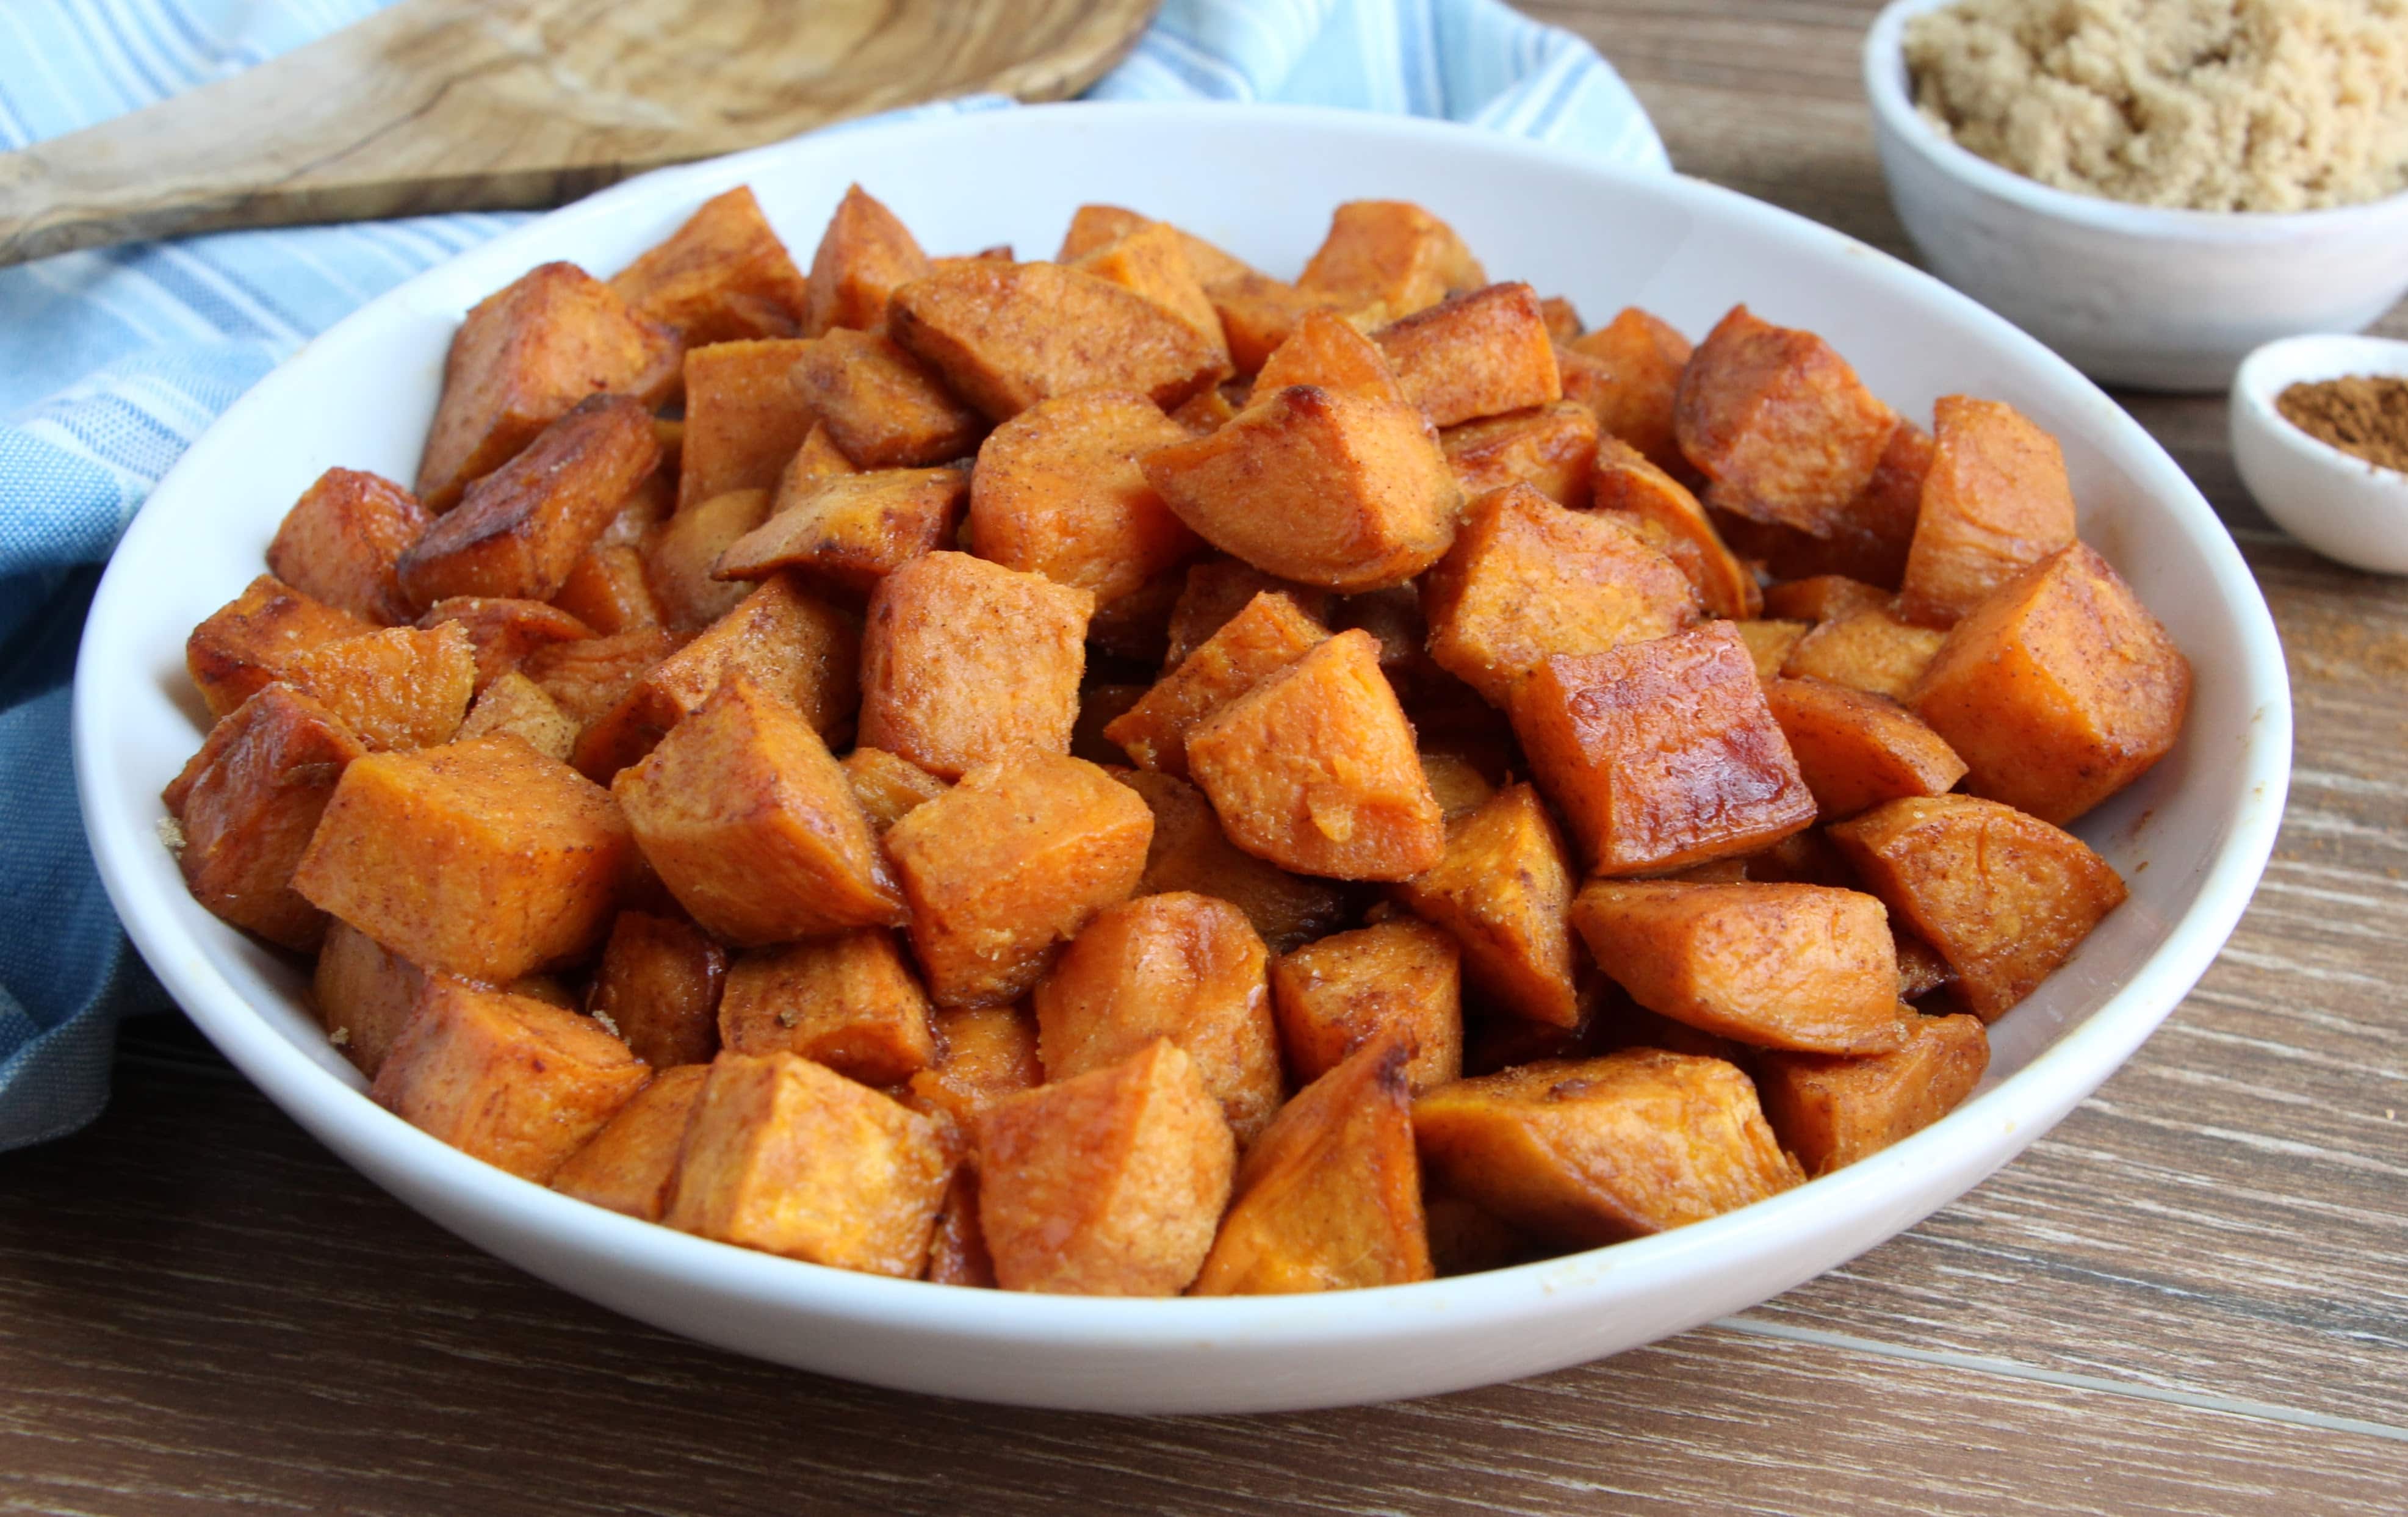 Roasted Cinnamon and Brown Sugar Sweet Potatoes in a white bowl sitting on a wooden cutting board